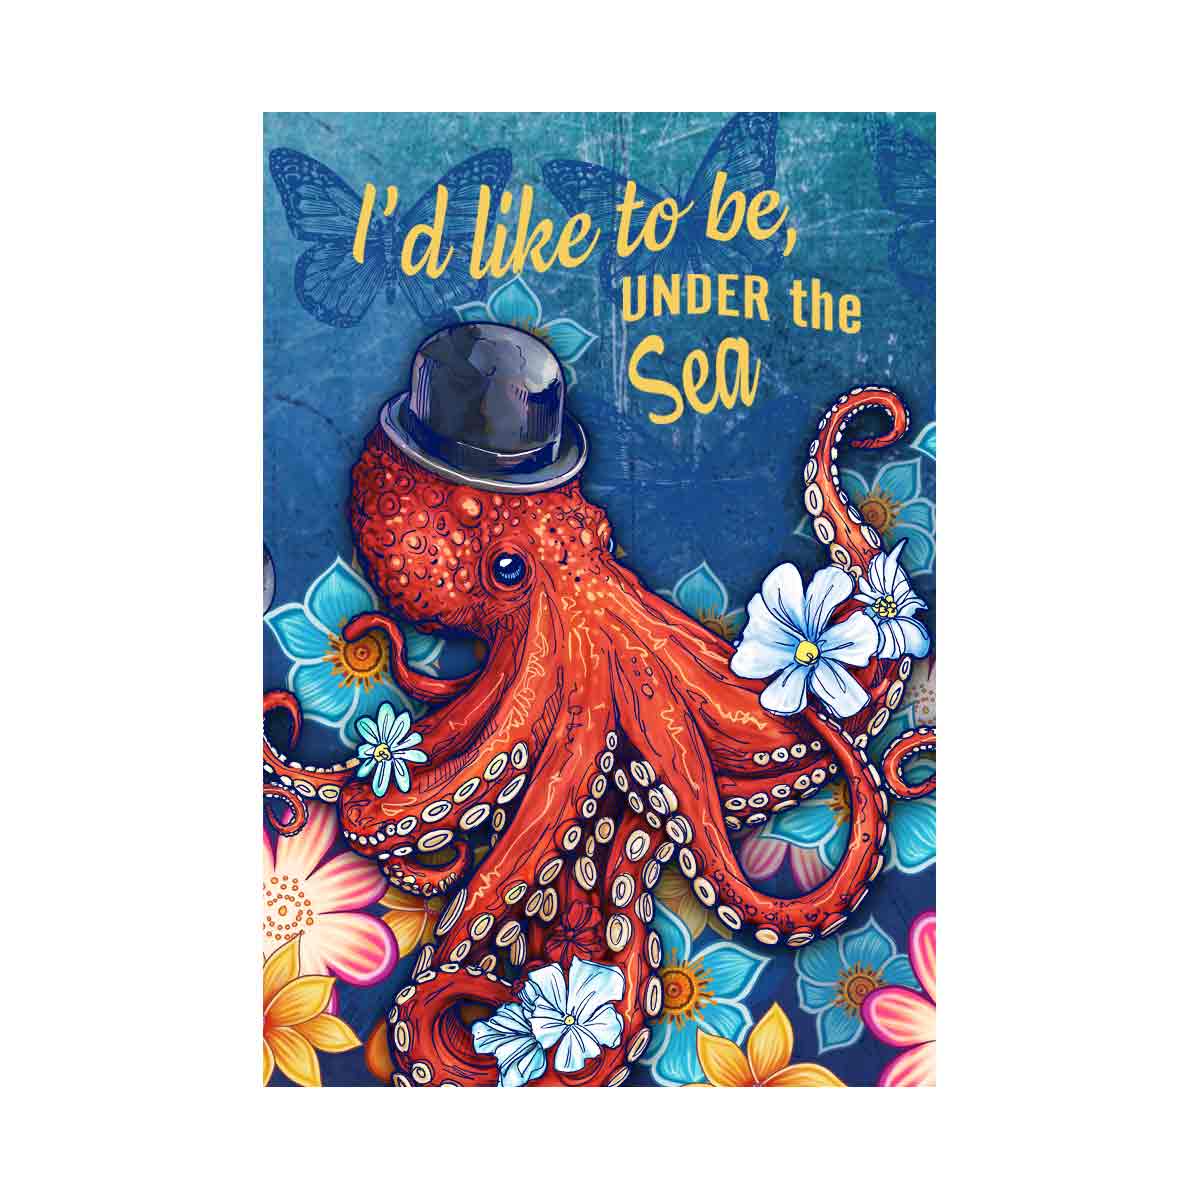 I'd like to be under the sea - Octopus's Garden